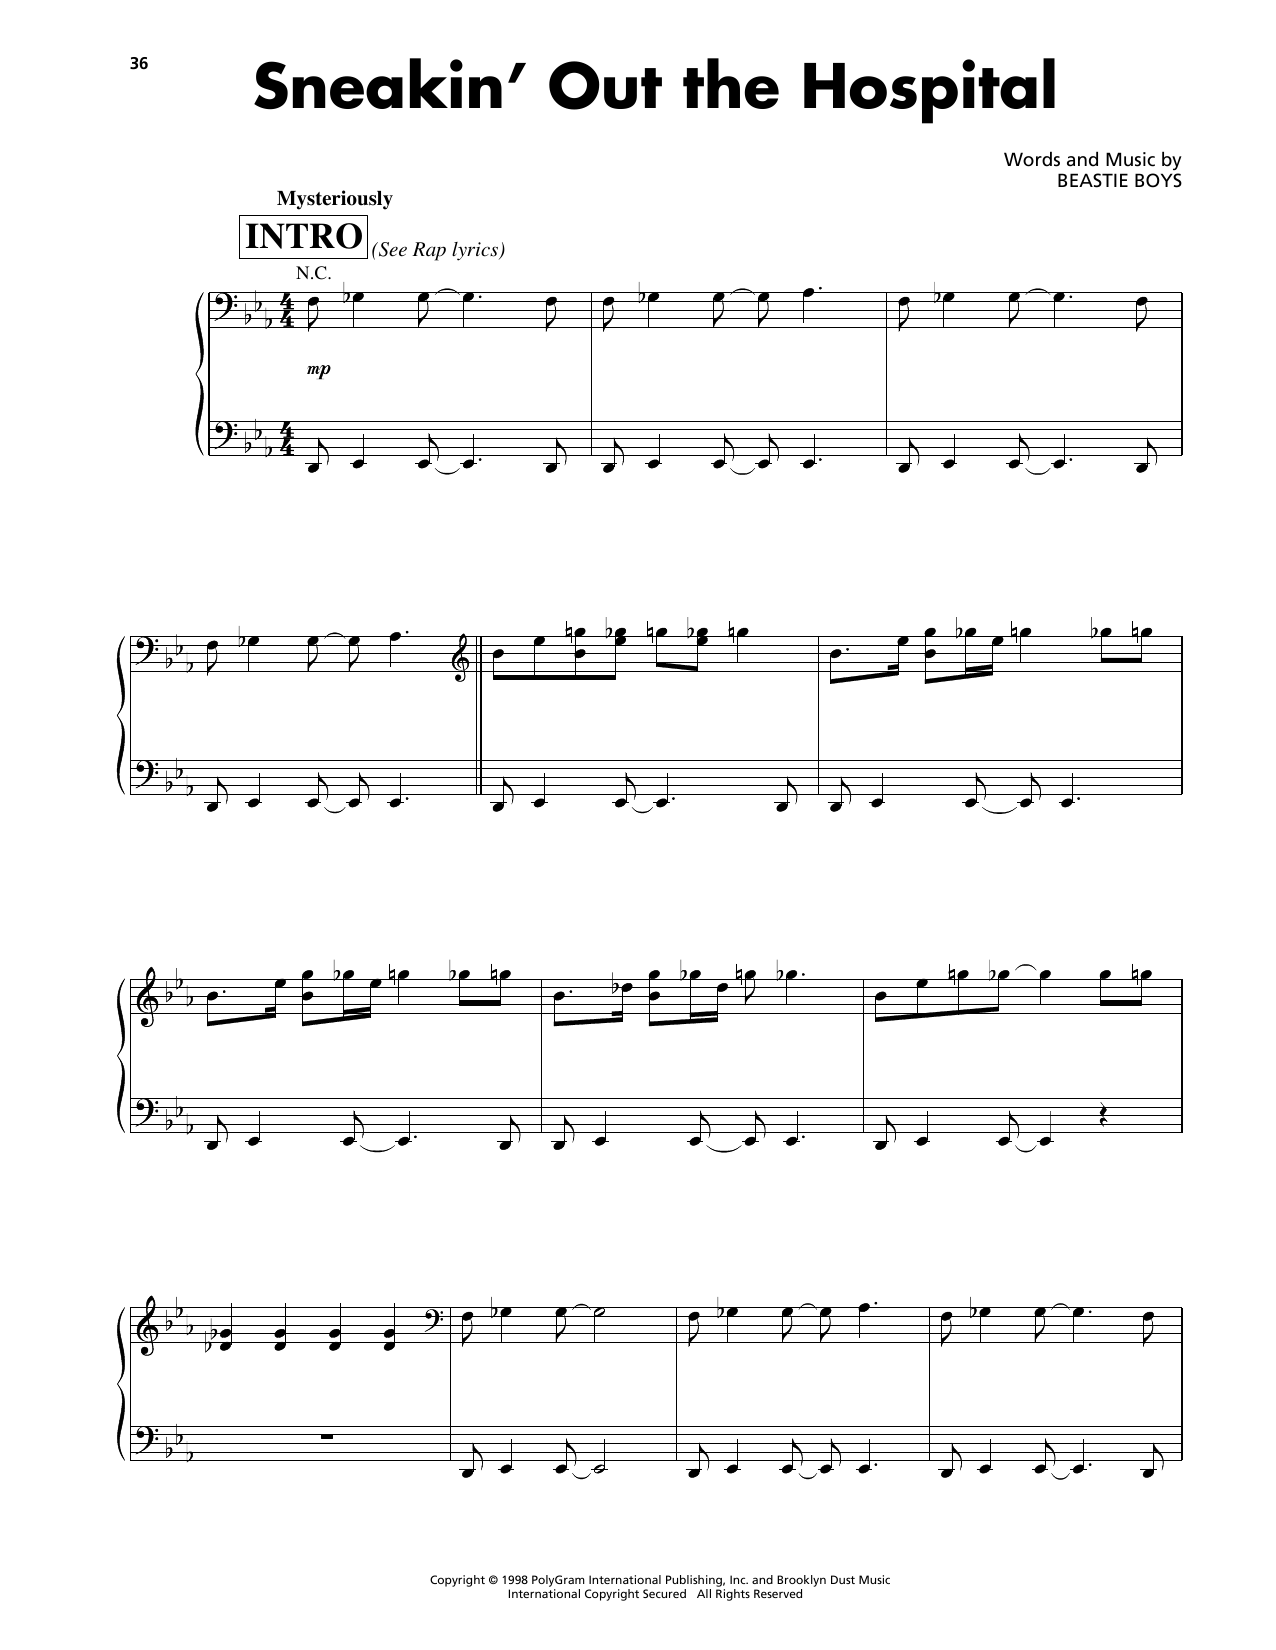 Download Beastie Boys Sneakin' Out The Hospital Sheet Music